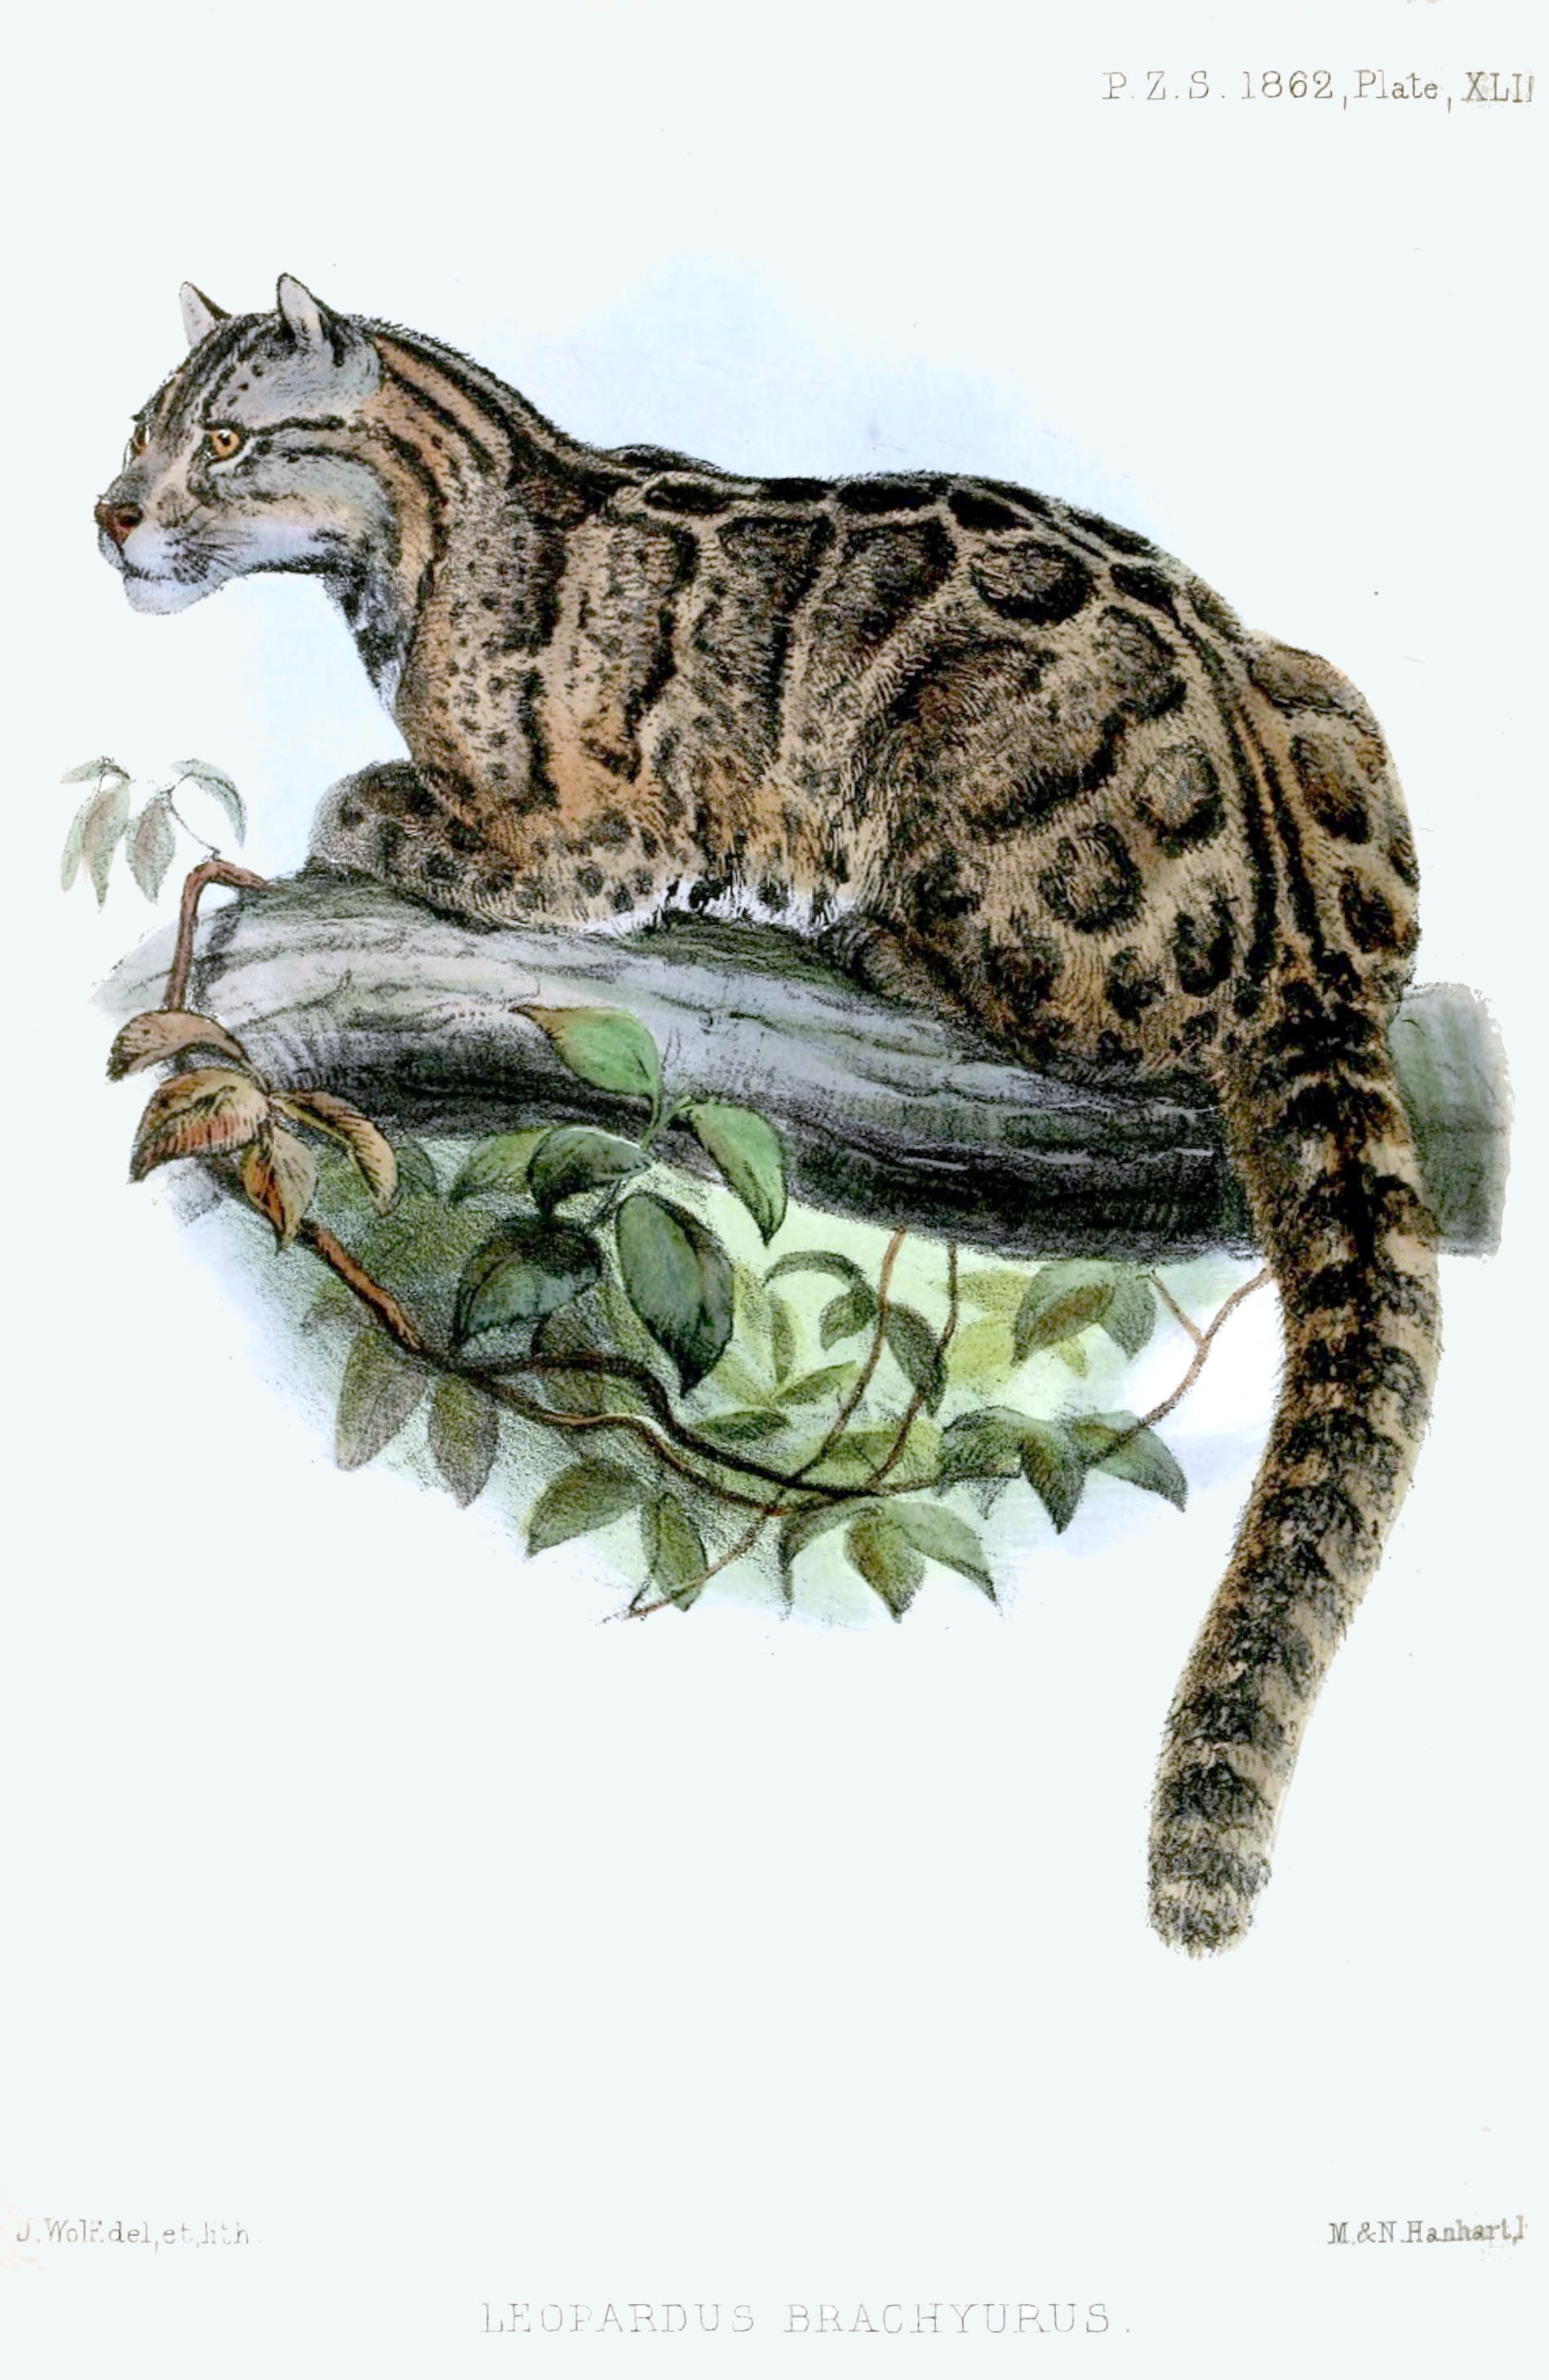 With no confirmed sightings of the big cat in decades, some question whether a Taiwan subspecies of the predator ever existed; it’s a question some say should be answered before captive clouded leopards are released into wild on island